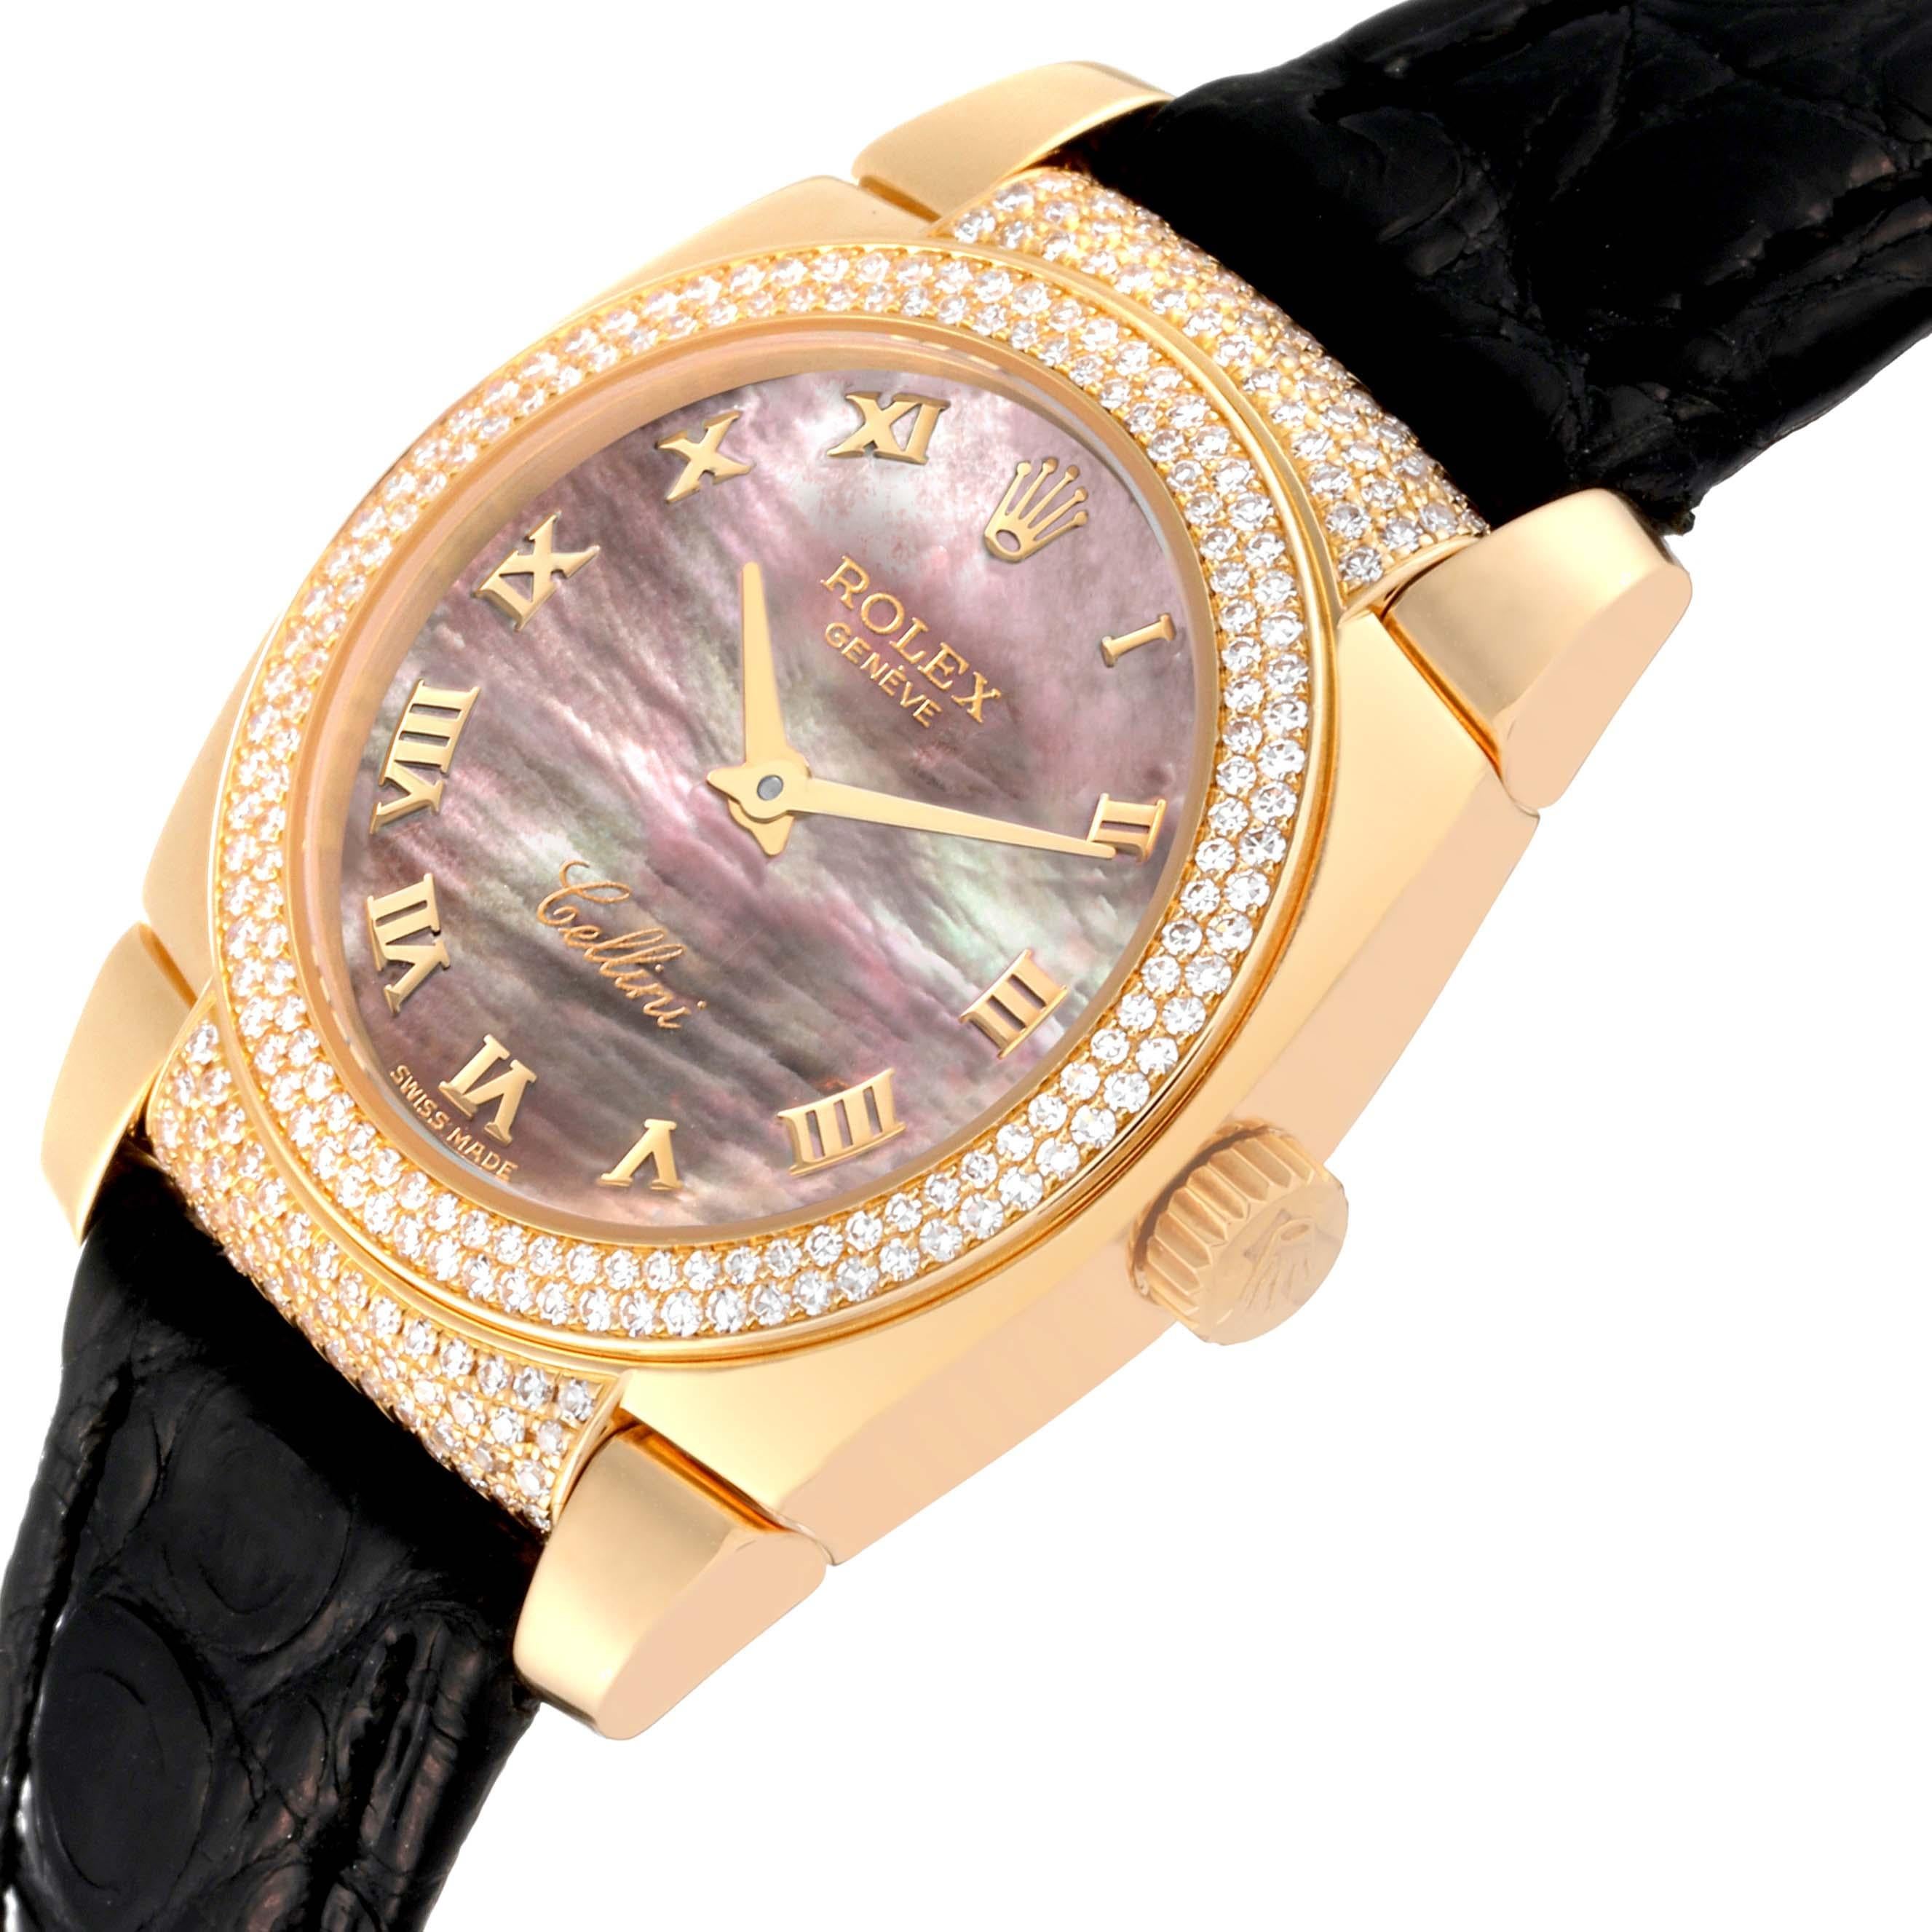 Rolex Cellini Cestello Yellow Gold Mother of Pearl Diamond Ladies Watch 6311 For Sale 1